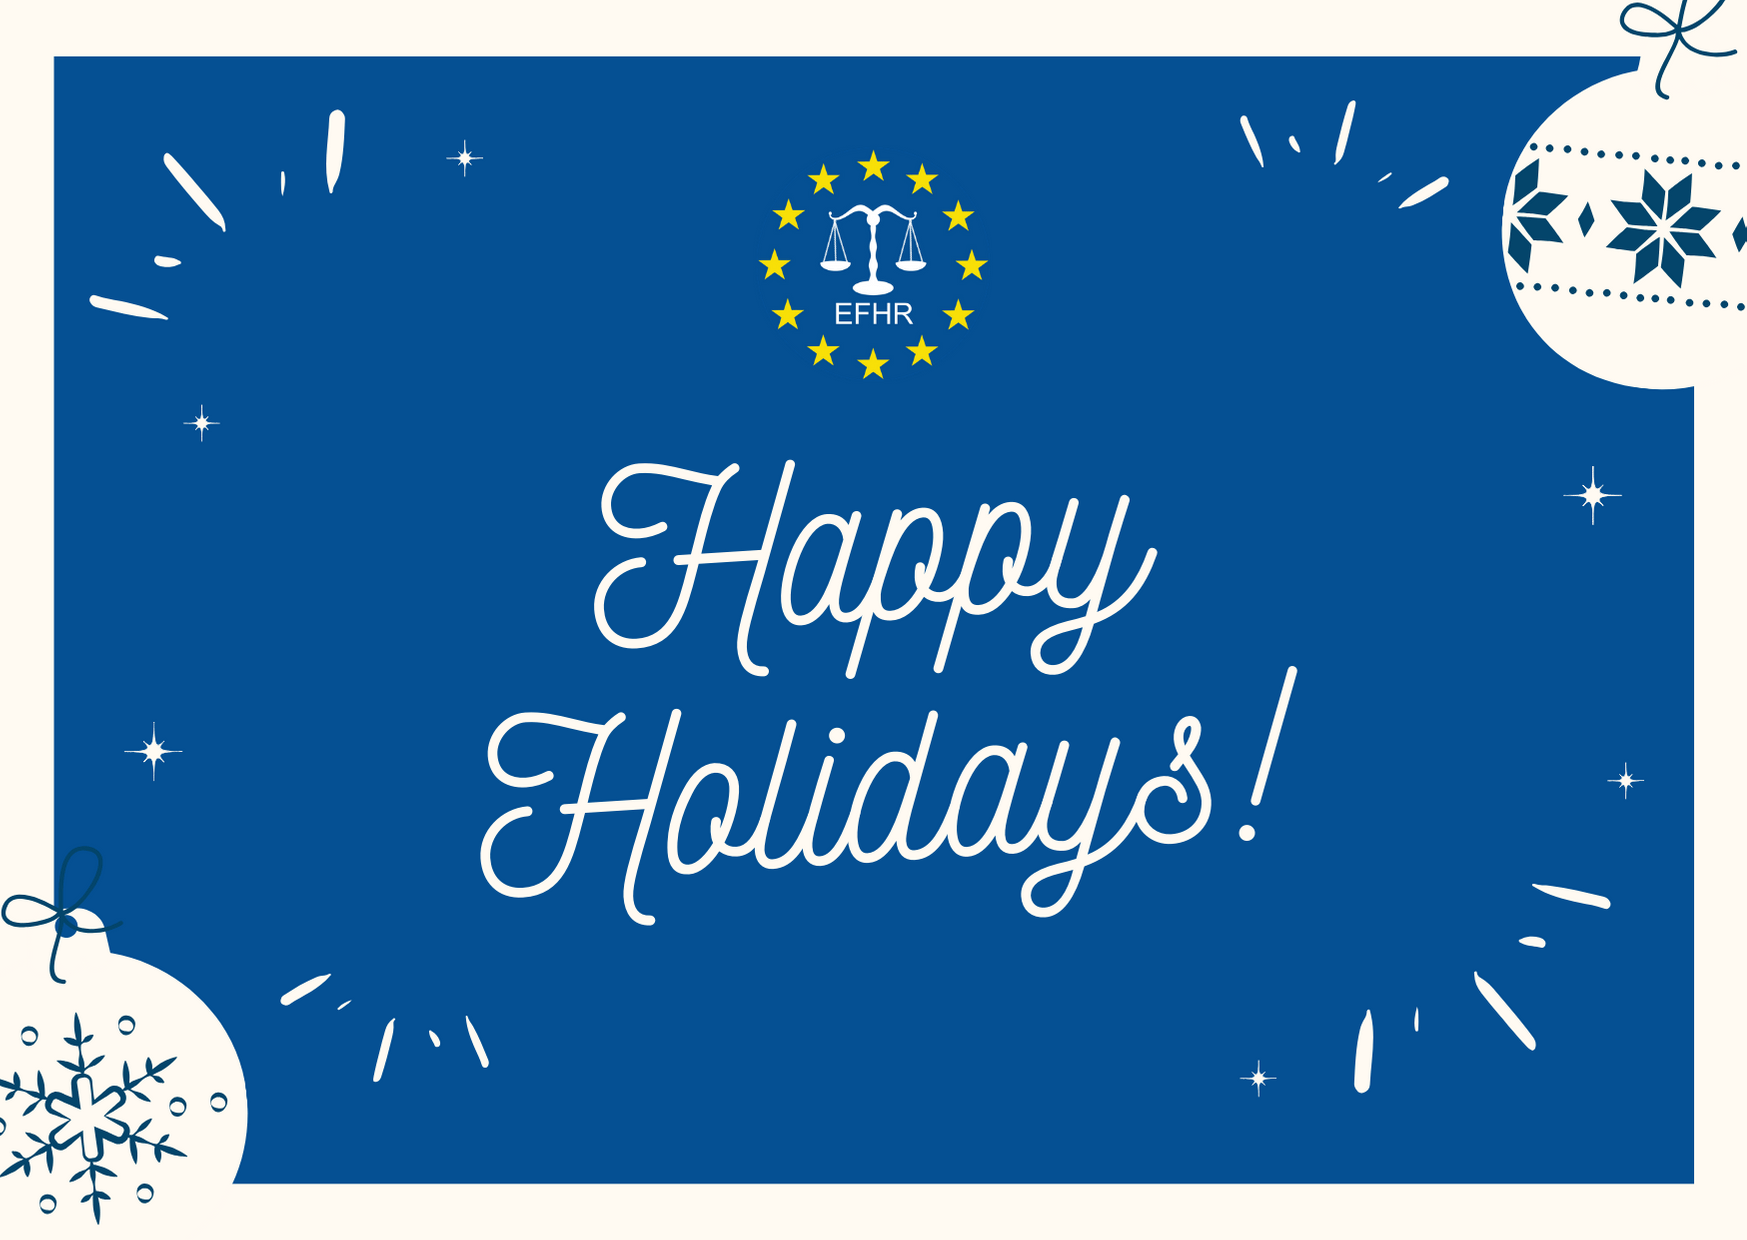 EFHR wishes you happy holidays!